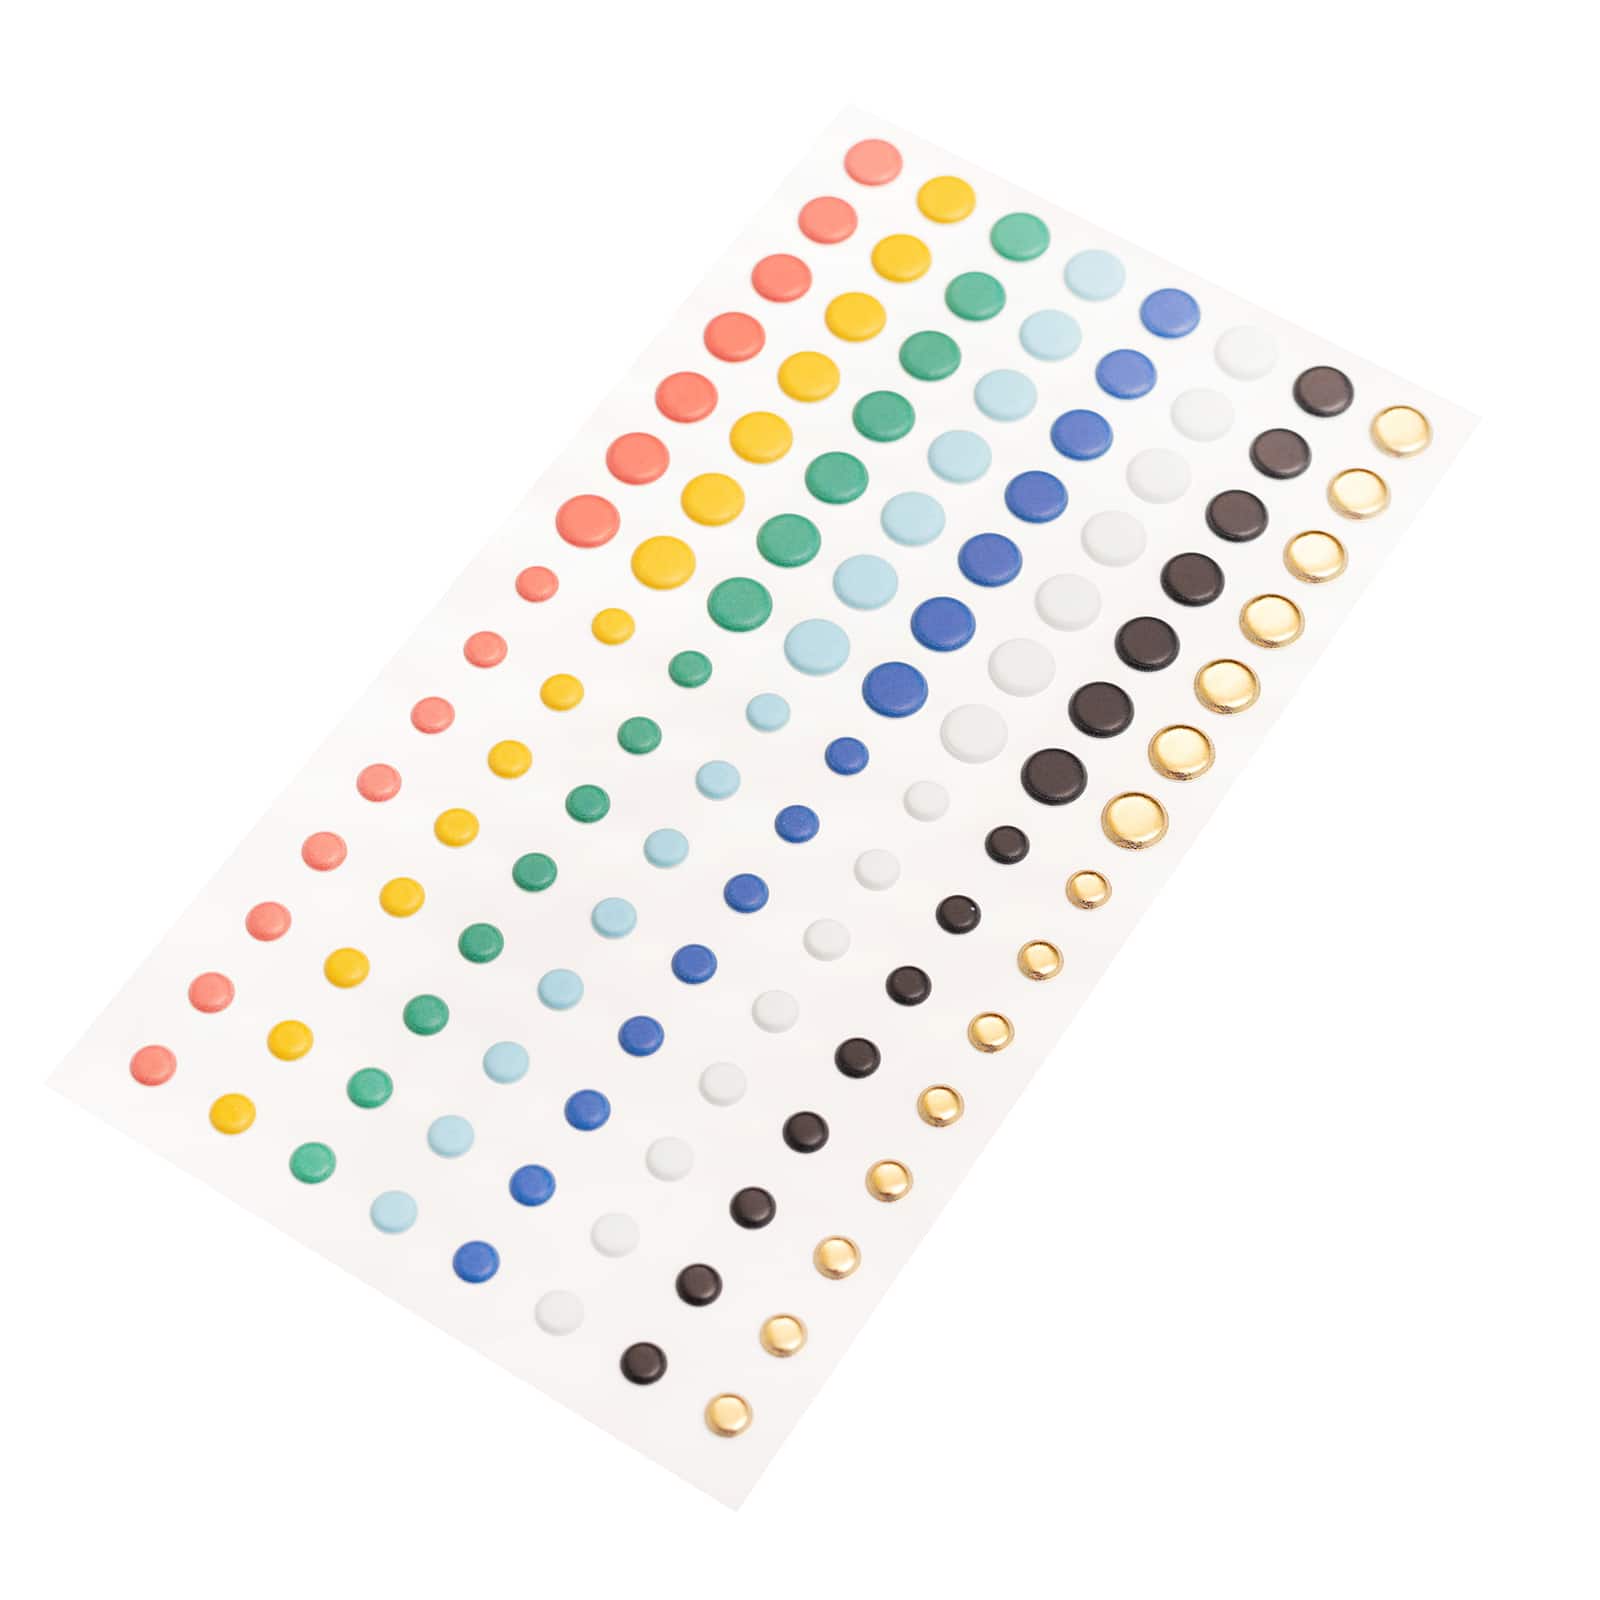 12 Packs: 120 ct. (1,440 total) Multicolor Matte Dot Stickers by